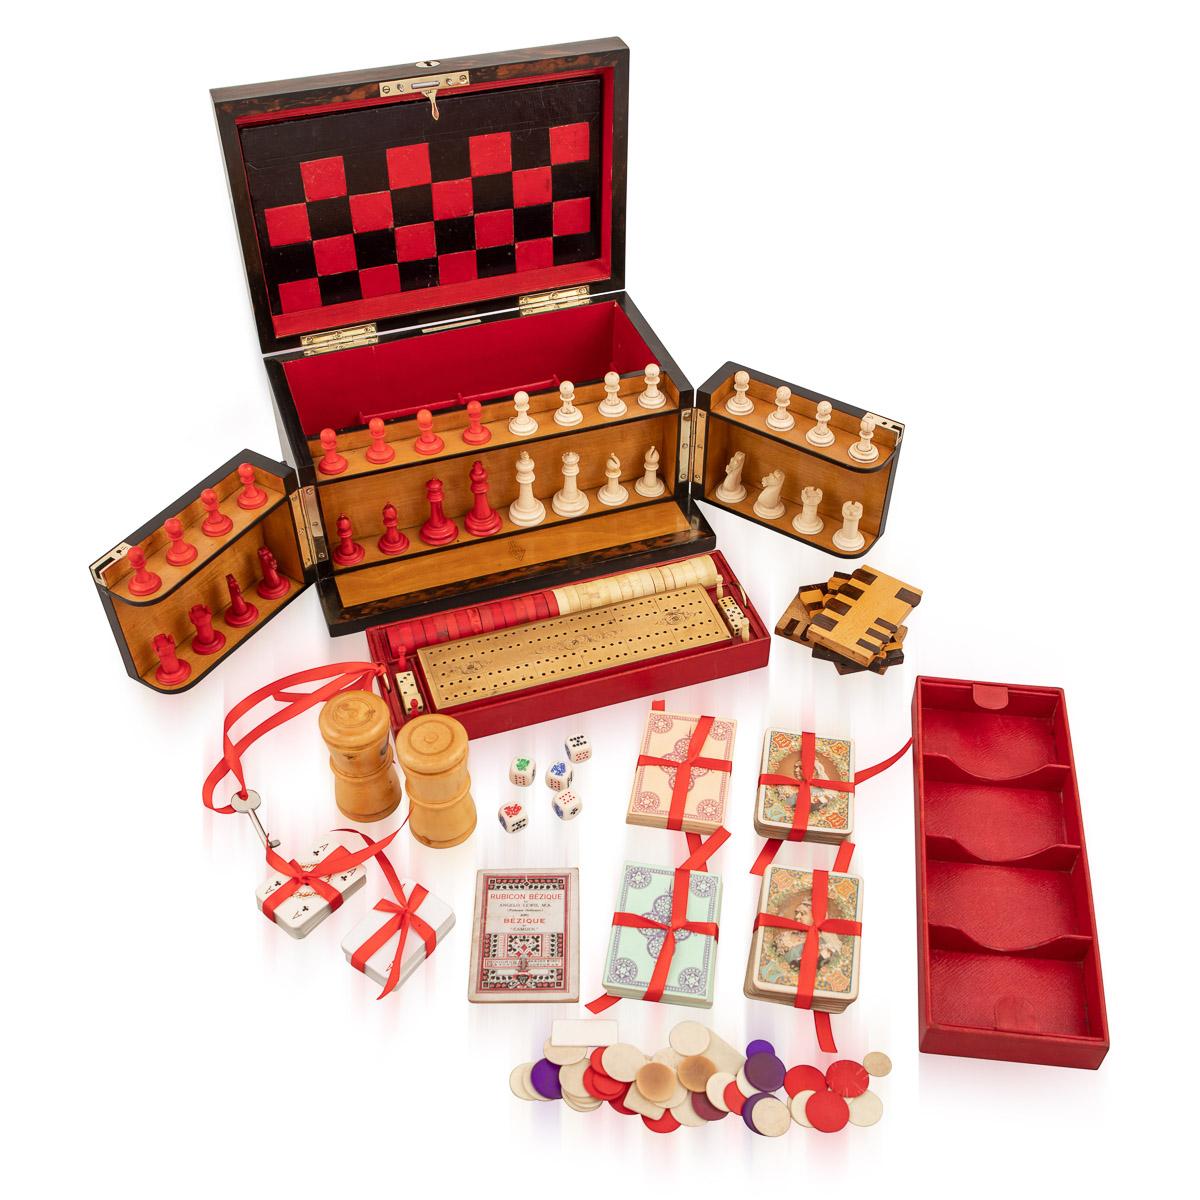 Antique late-19th century Victorian coromandel cased games compendium, the interior comprising a carved white and red chess set, draughts, dominoes, dice, cribbage board with markers, leather bound boards for games, playing cards, droughts counters,